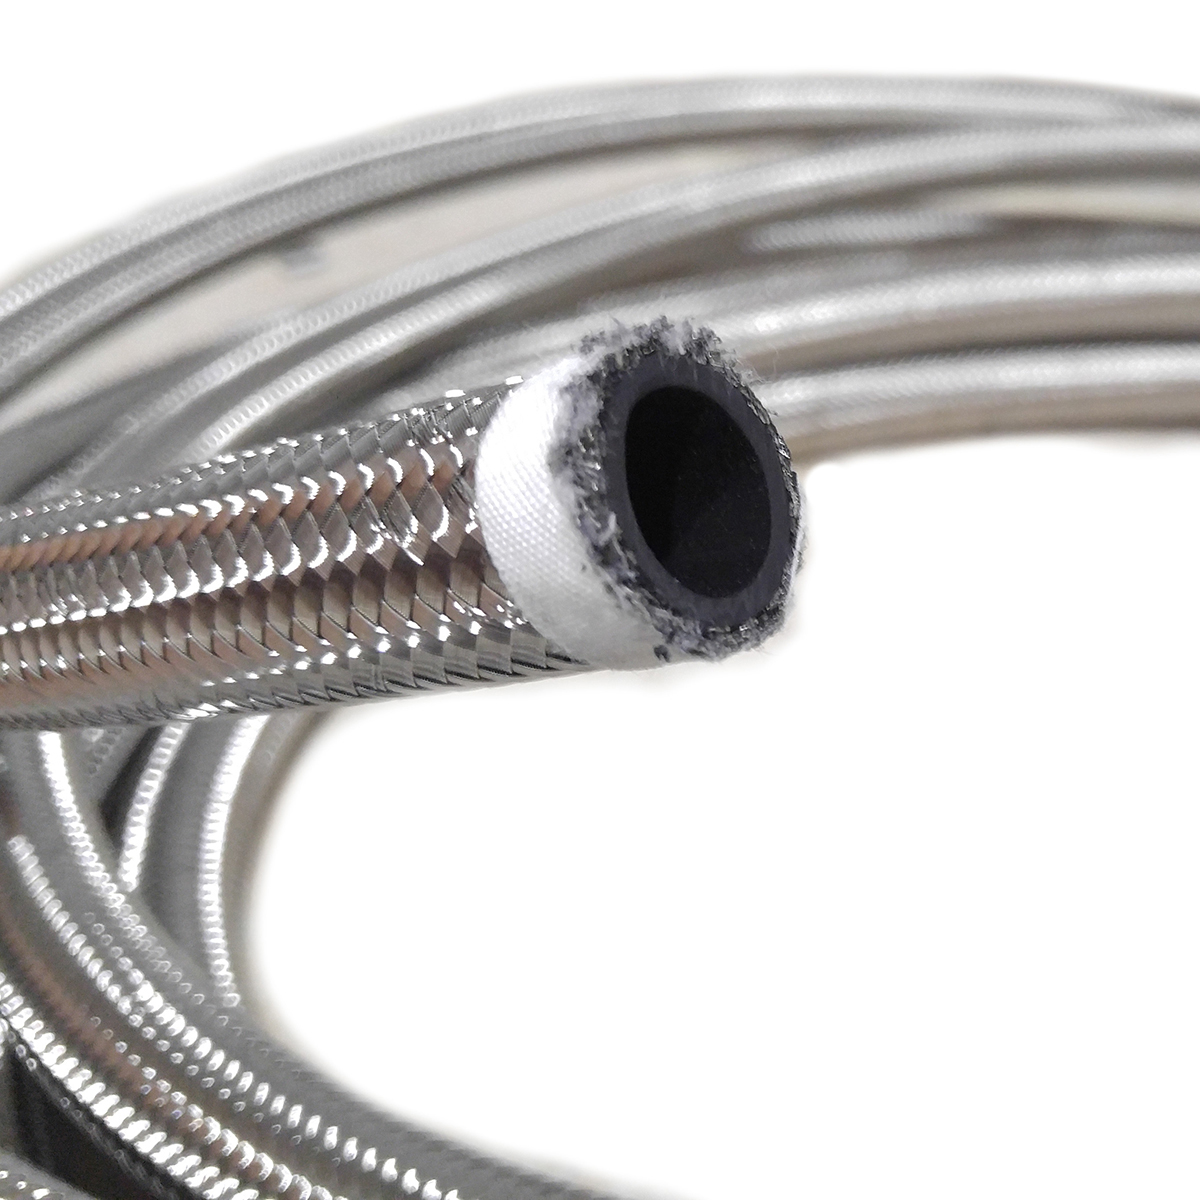 Stainless Steel Braided Hose (10 Foot Roll)